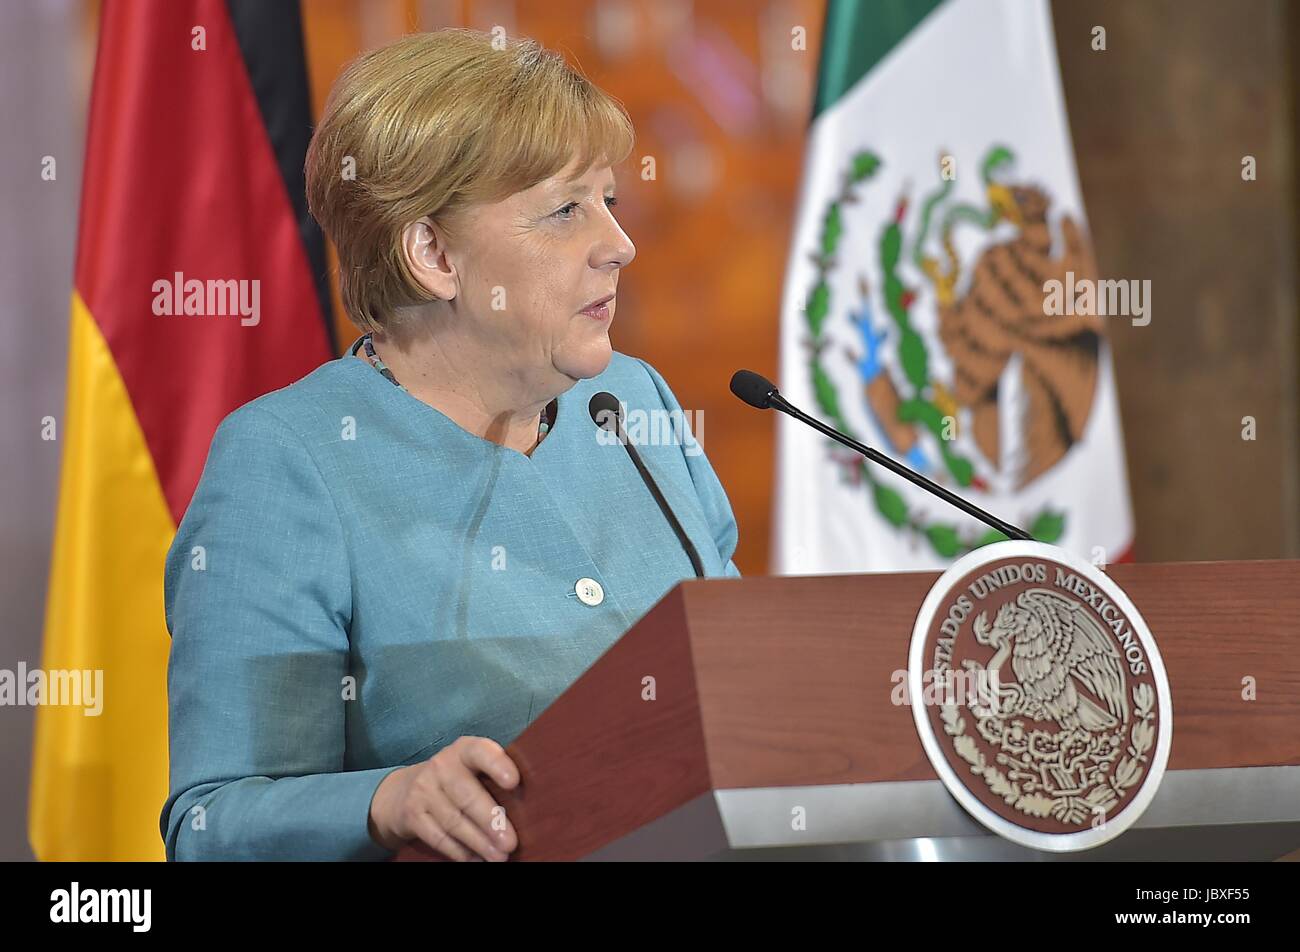 German Chancellor Angela Merkel speaks during reception hosted by Mexican President Enrique Pena Nieto at the National Palace of Los Pinos June 9, 2017 in Mexico City, Mexico. Stock Photo